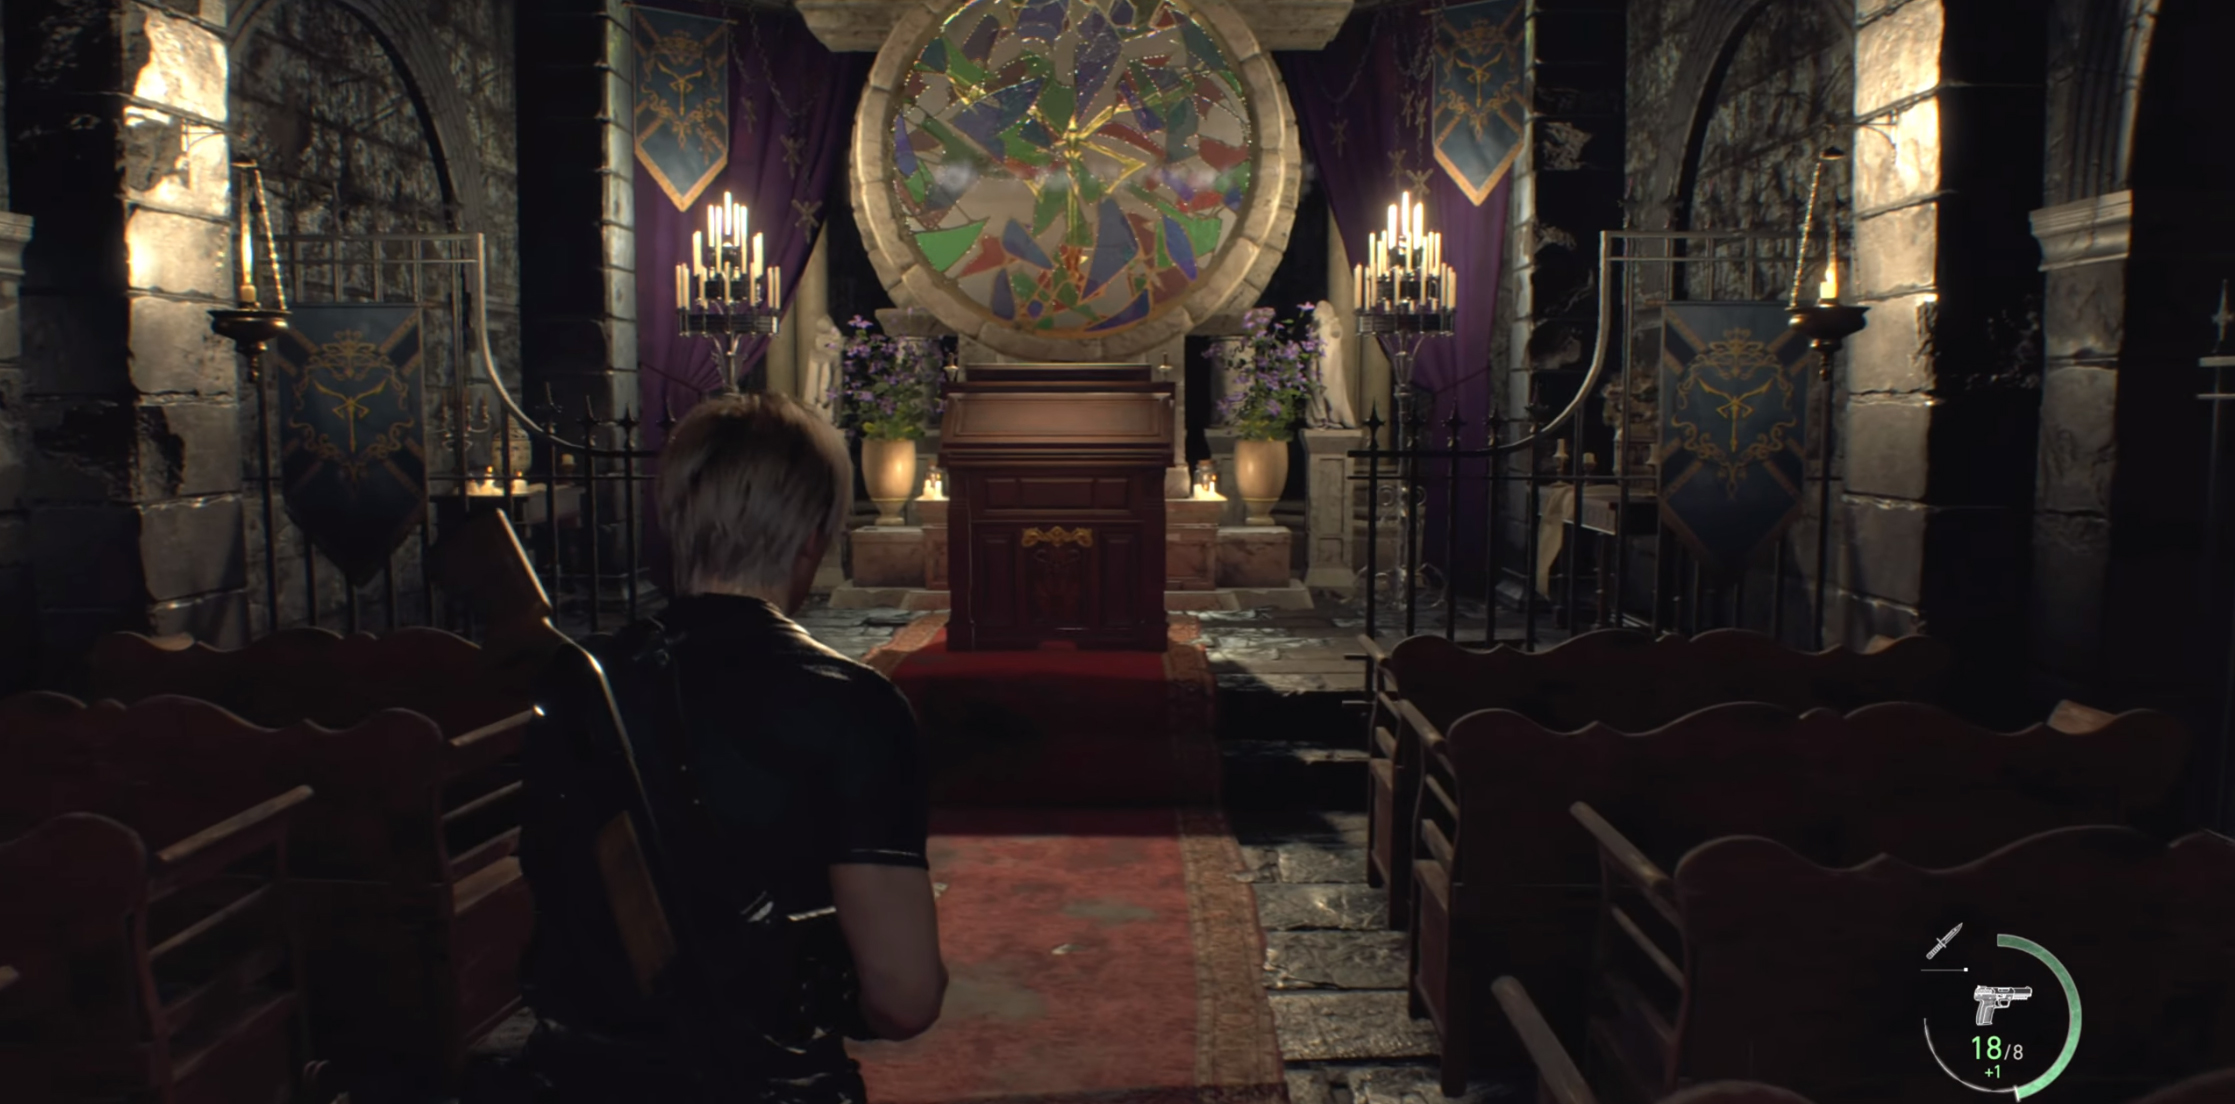 How to solve the church lights puzzle - Resident Evil 4